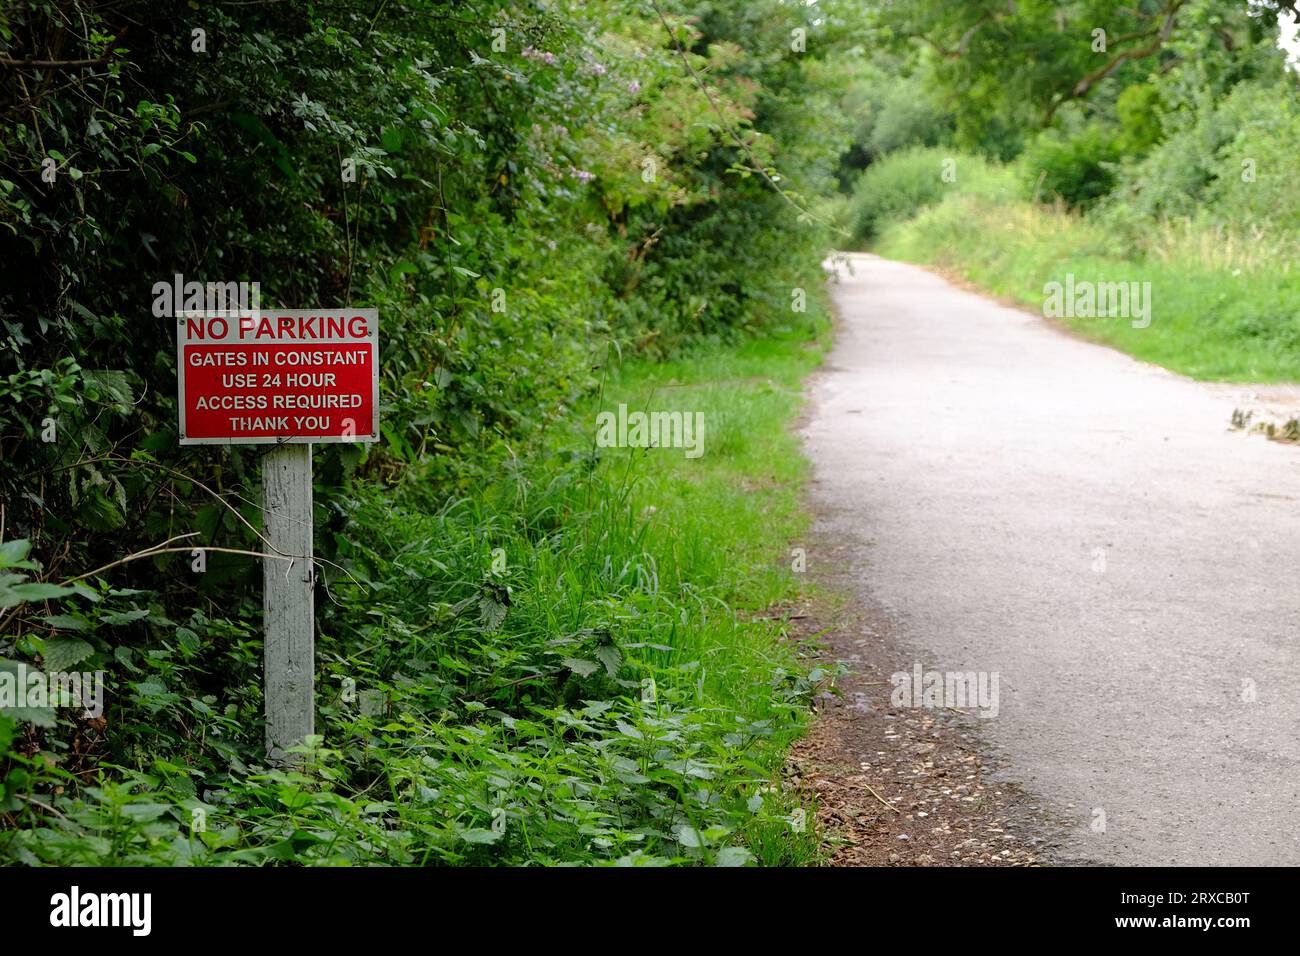 July 2023 - No Parking sign in a country lane to allow access through gates opposite. Stock Photo